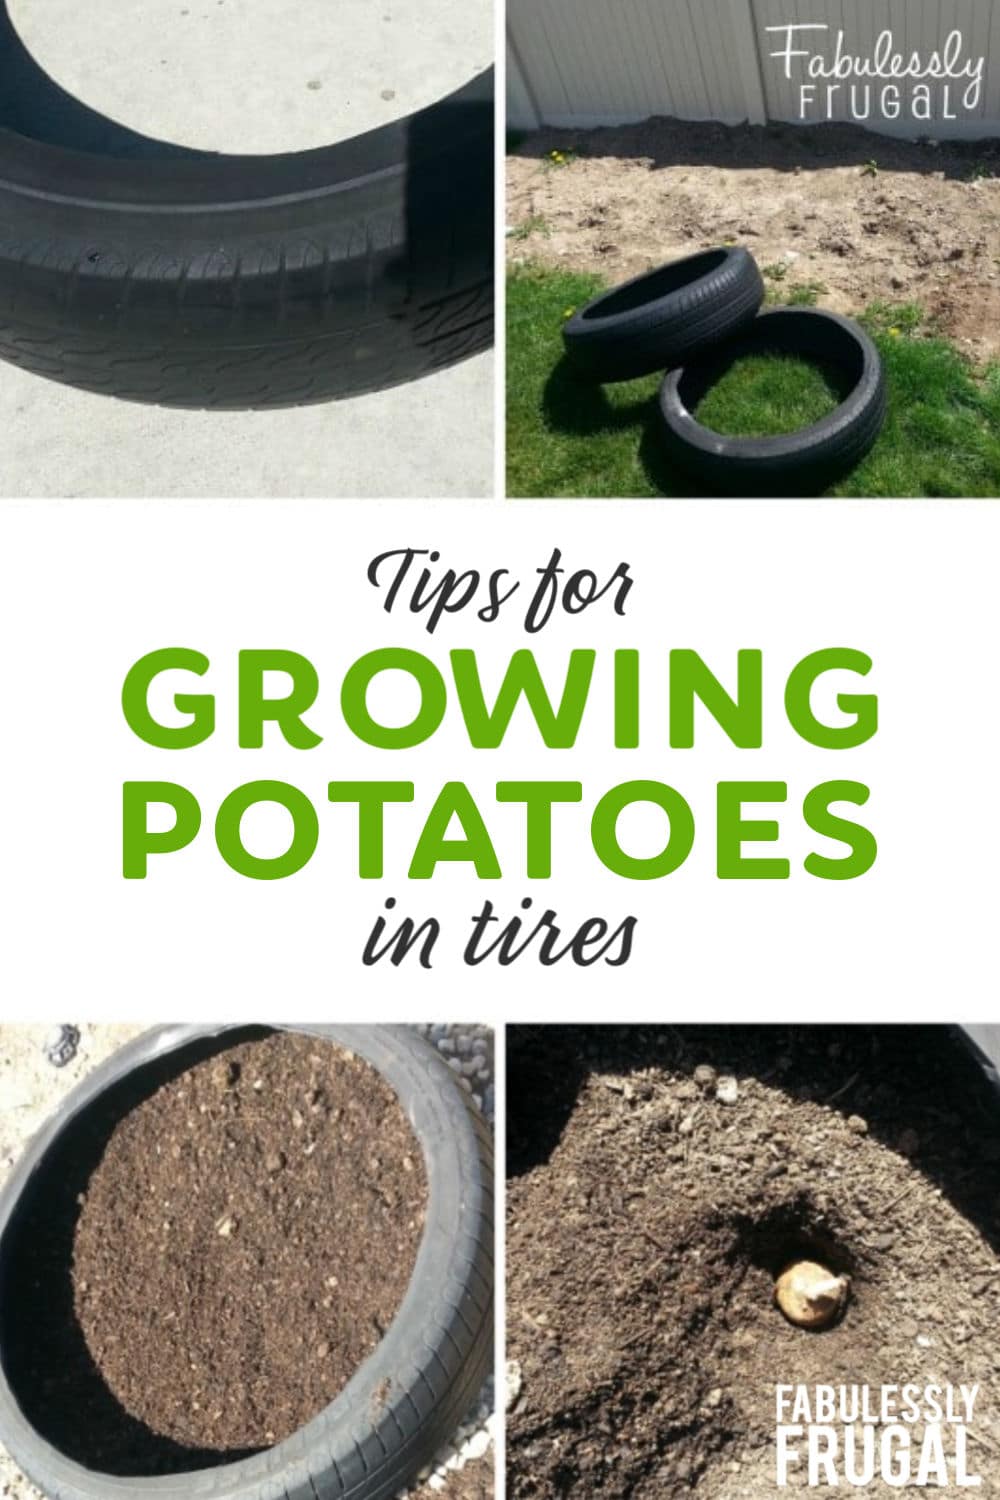 Tips for growing potatoes in tires